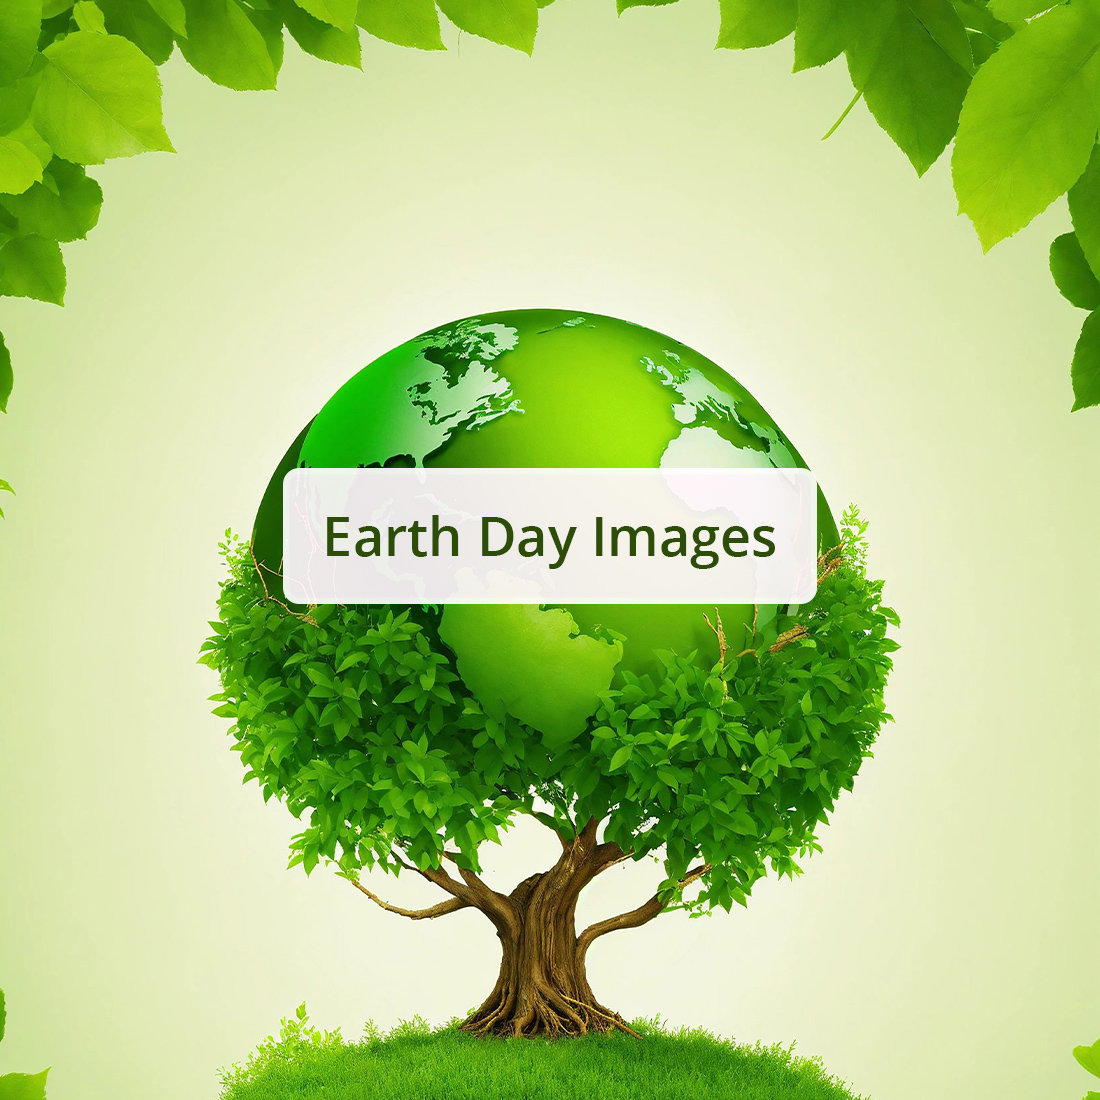 Earth day images, World environment day preview image.